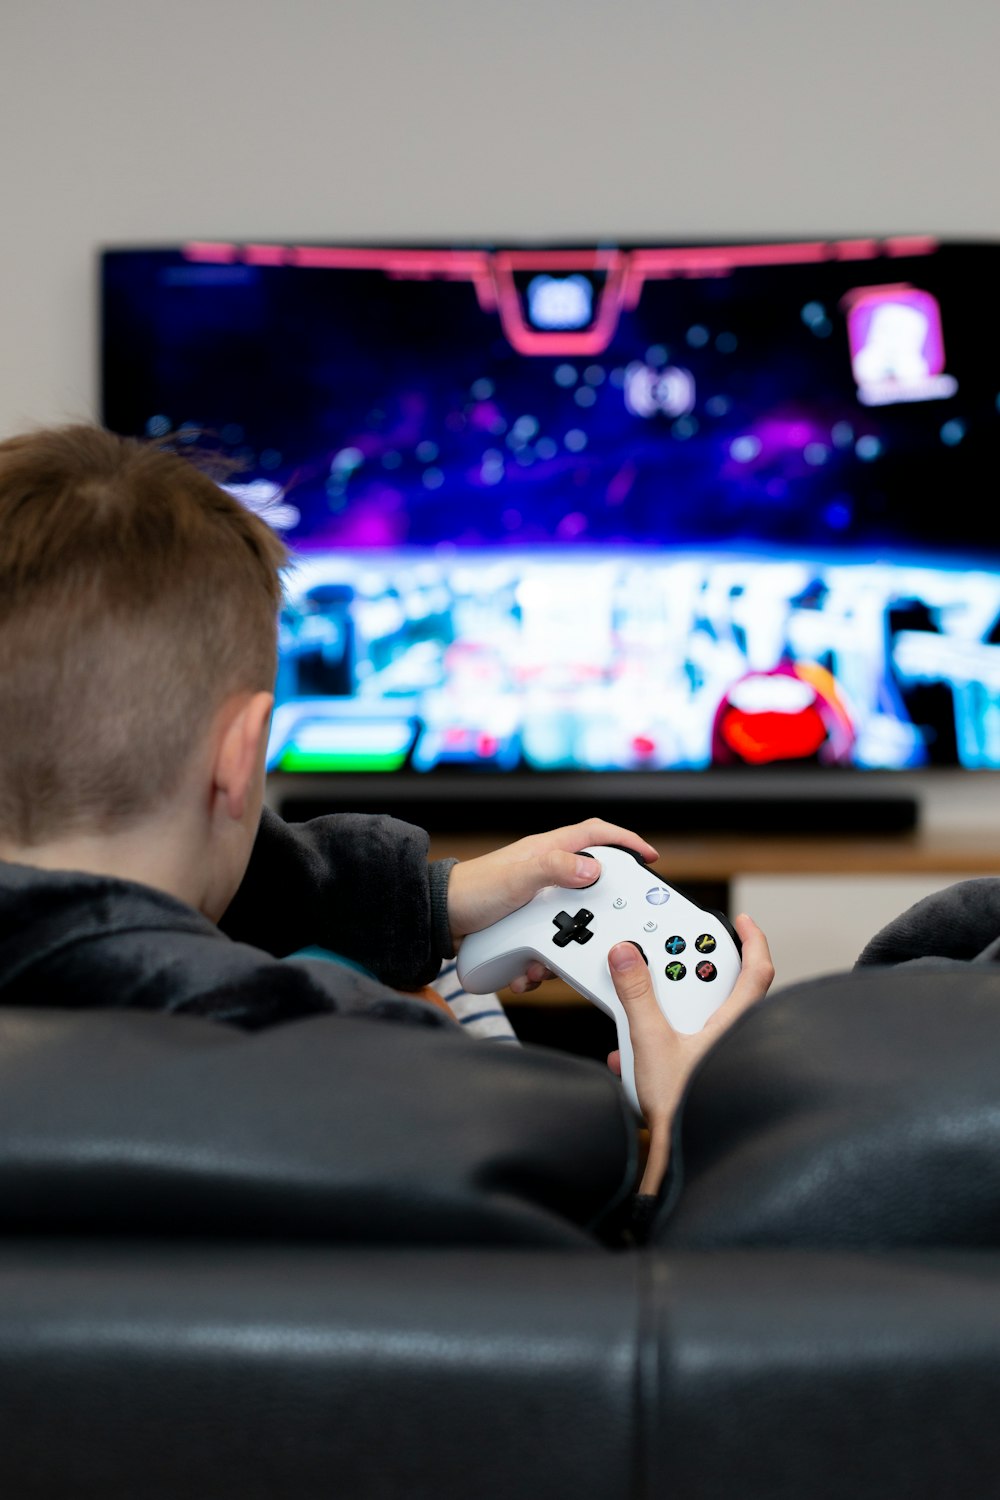 A young boy playing a video game on the nintendo wii photo – Free Fortnite  live event Image on Unsplash